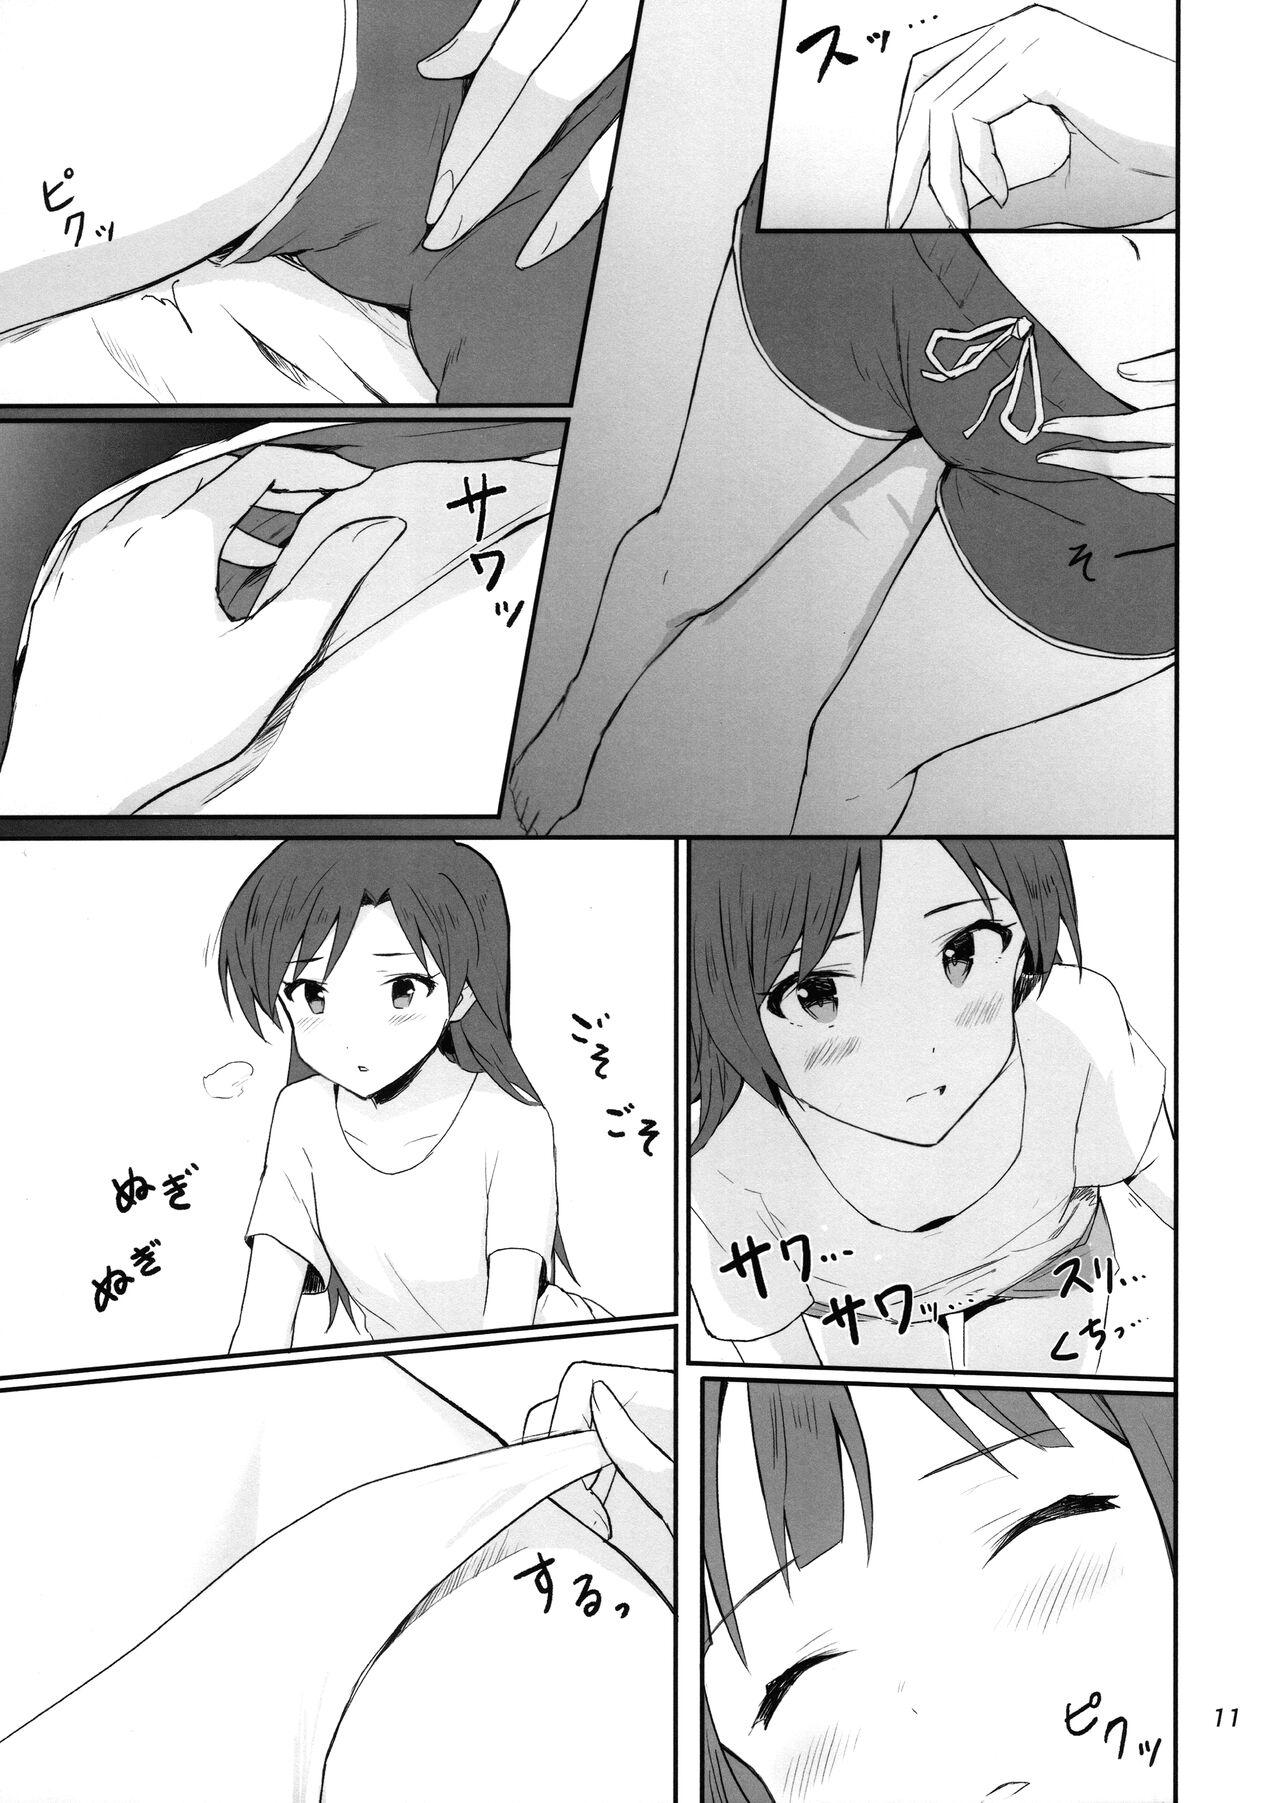 Mulata Idle running - The idolmaster Best Blowjobs - Page 10